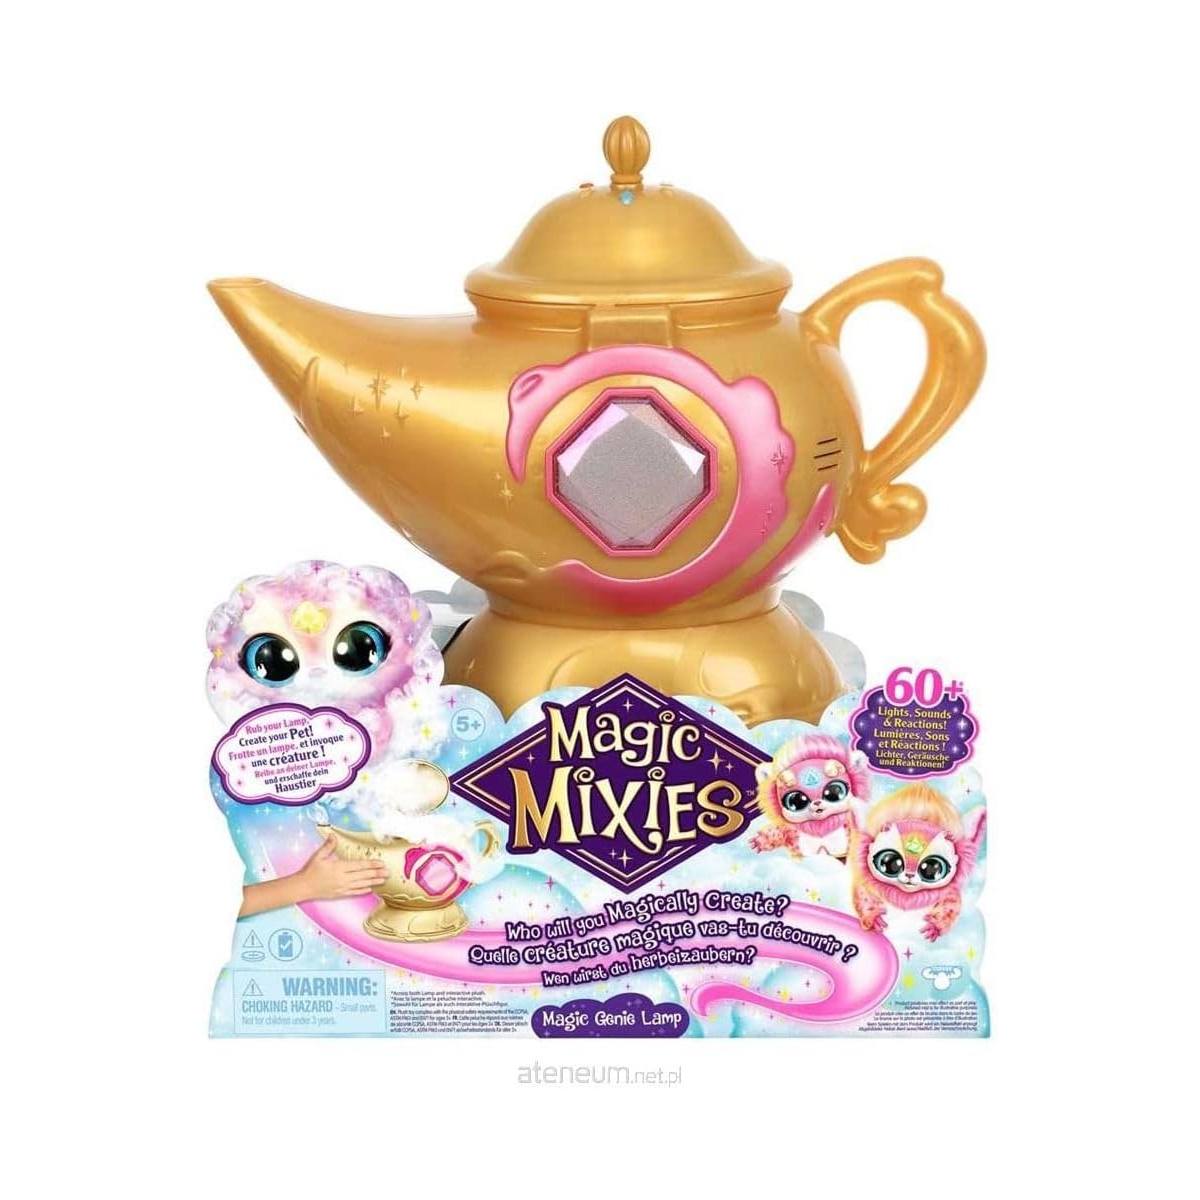 The retail giant is selling the Magic Mixies Magic Genie Lamp for just £24.99